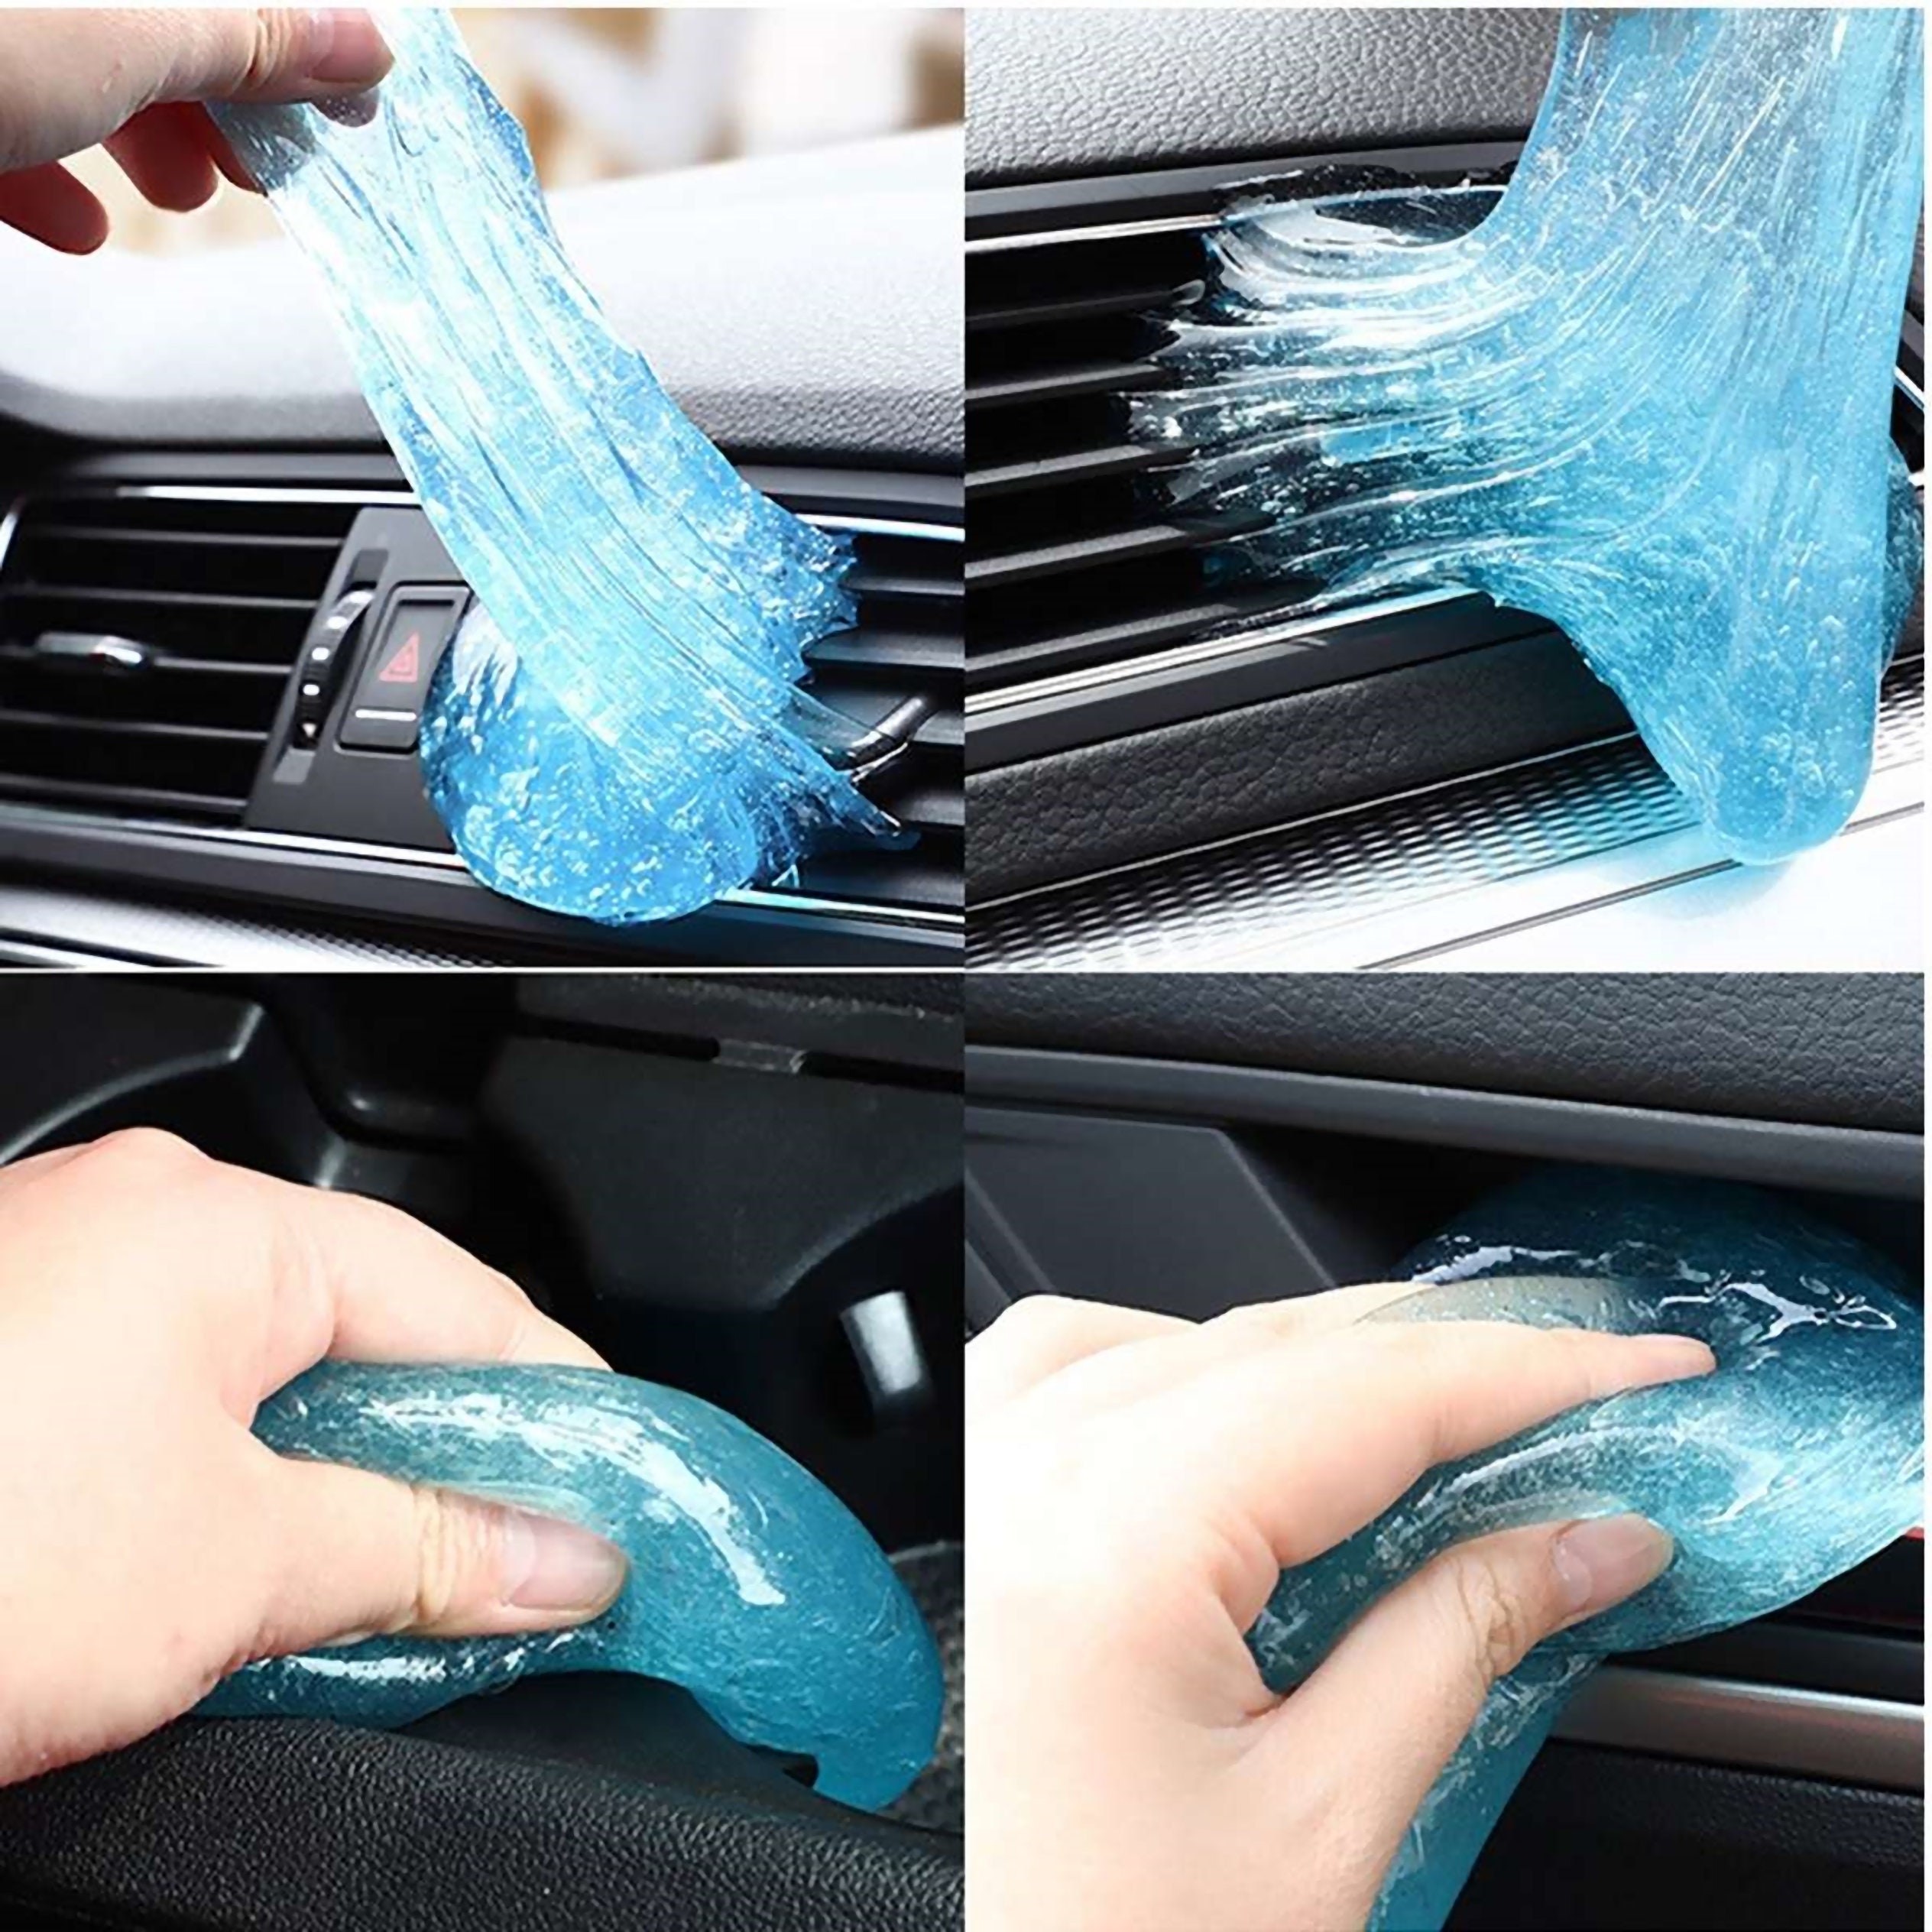 TICARVE Car Cleaning Gel Car Cleaning Putty Car Slime for Cleaning Car  Detailing Putty Detail Tools Car Interior Cleaner Automotive Car Cleaning  Kits